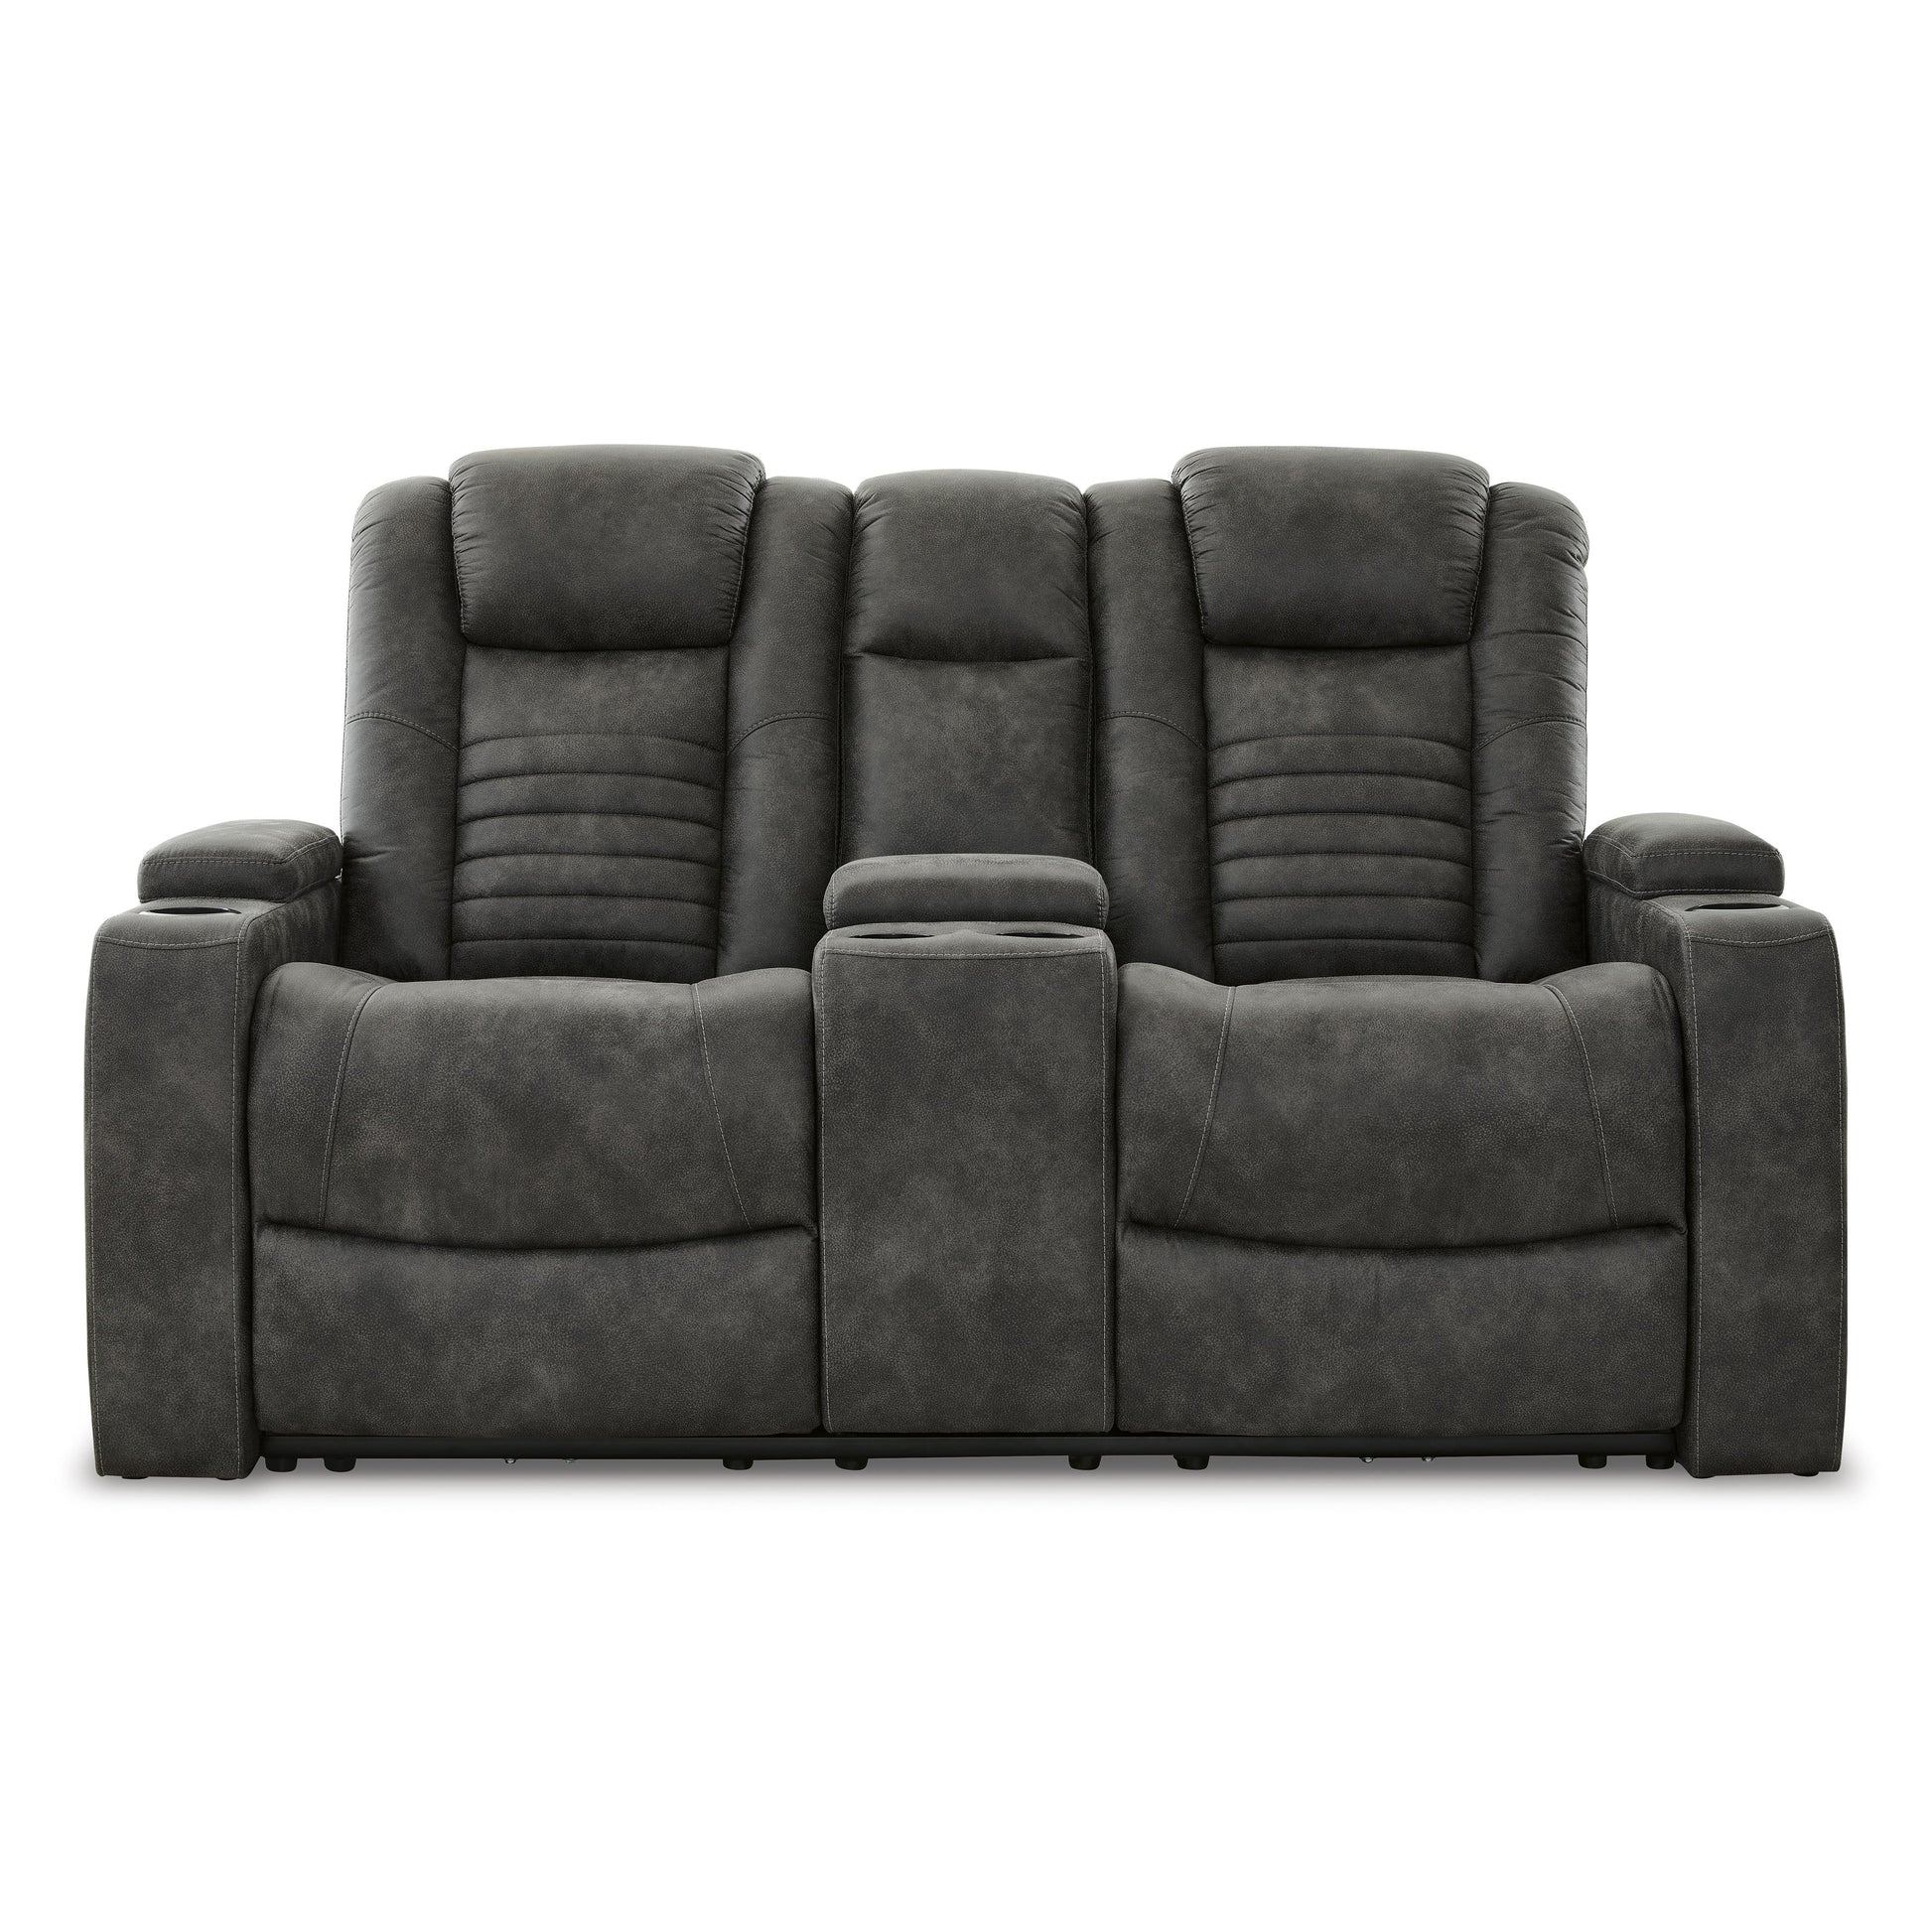 Signature Design by Ashley Soundcheck Power Reclining Leather Look Loveseat 3060618 IMAGE 3